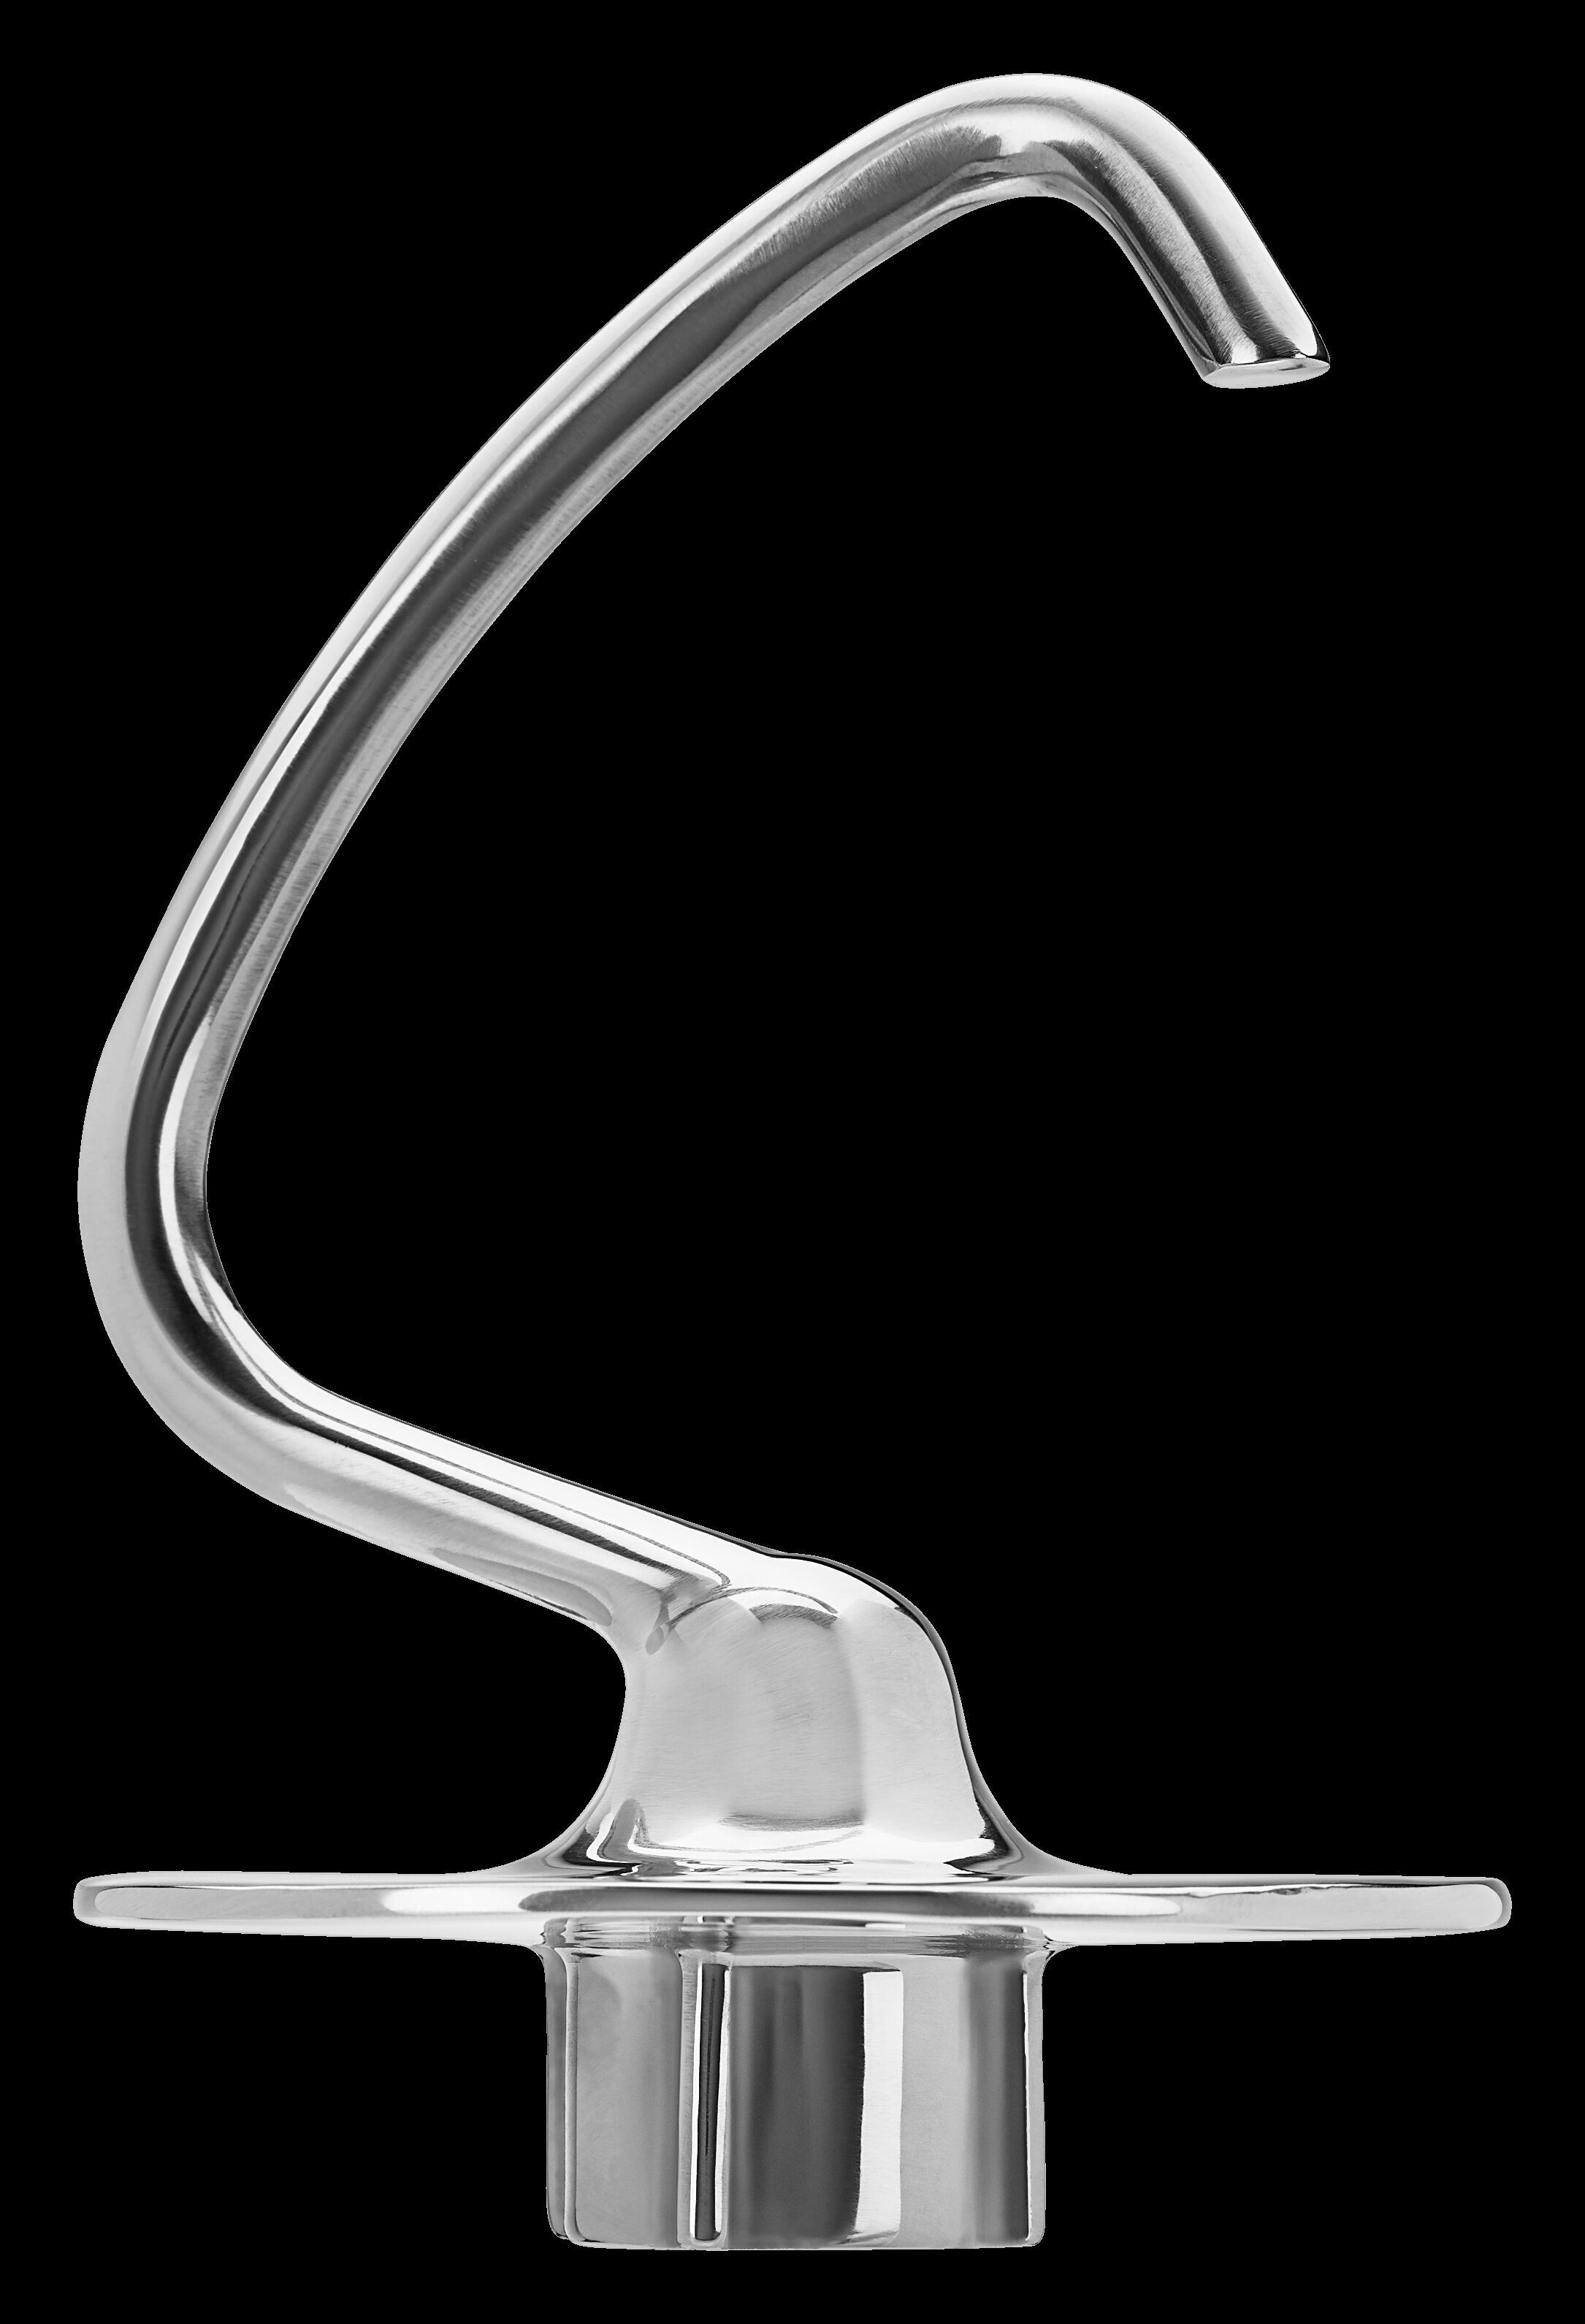 KitchenAid® Stainless Steel Dough Hook for 4.5 and 5 Quart KitchenAid®  Tilt-Head Stand Mixers & Reviews